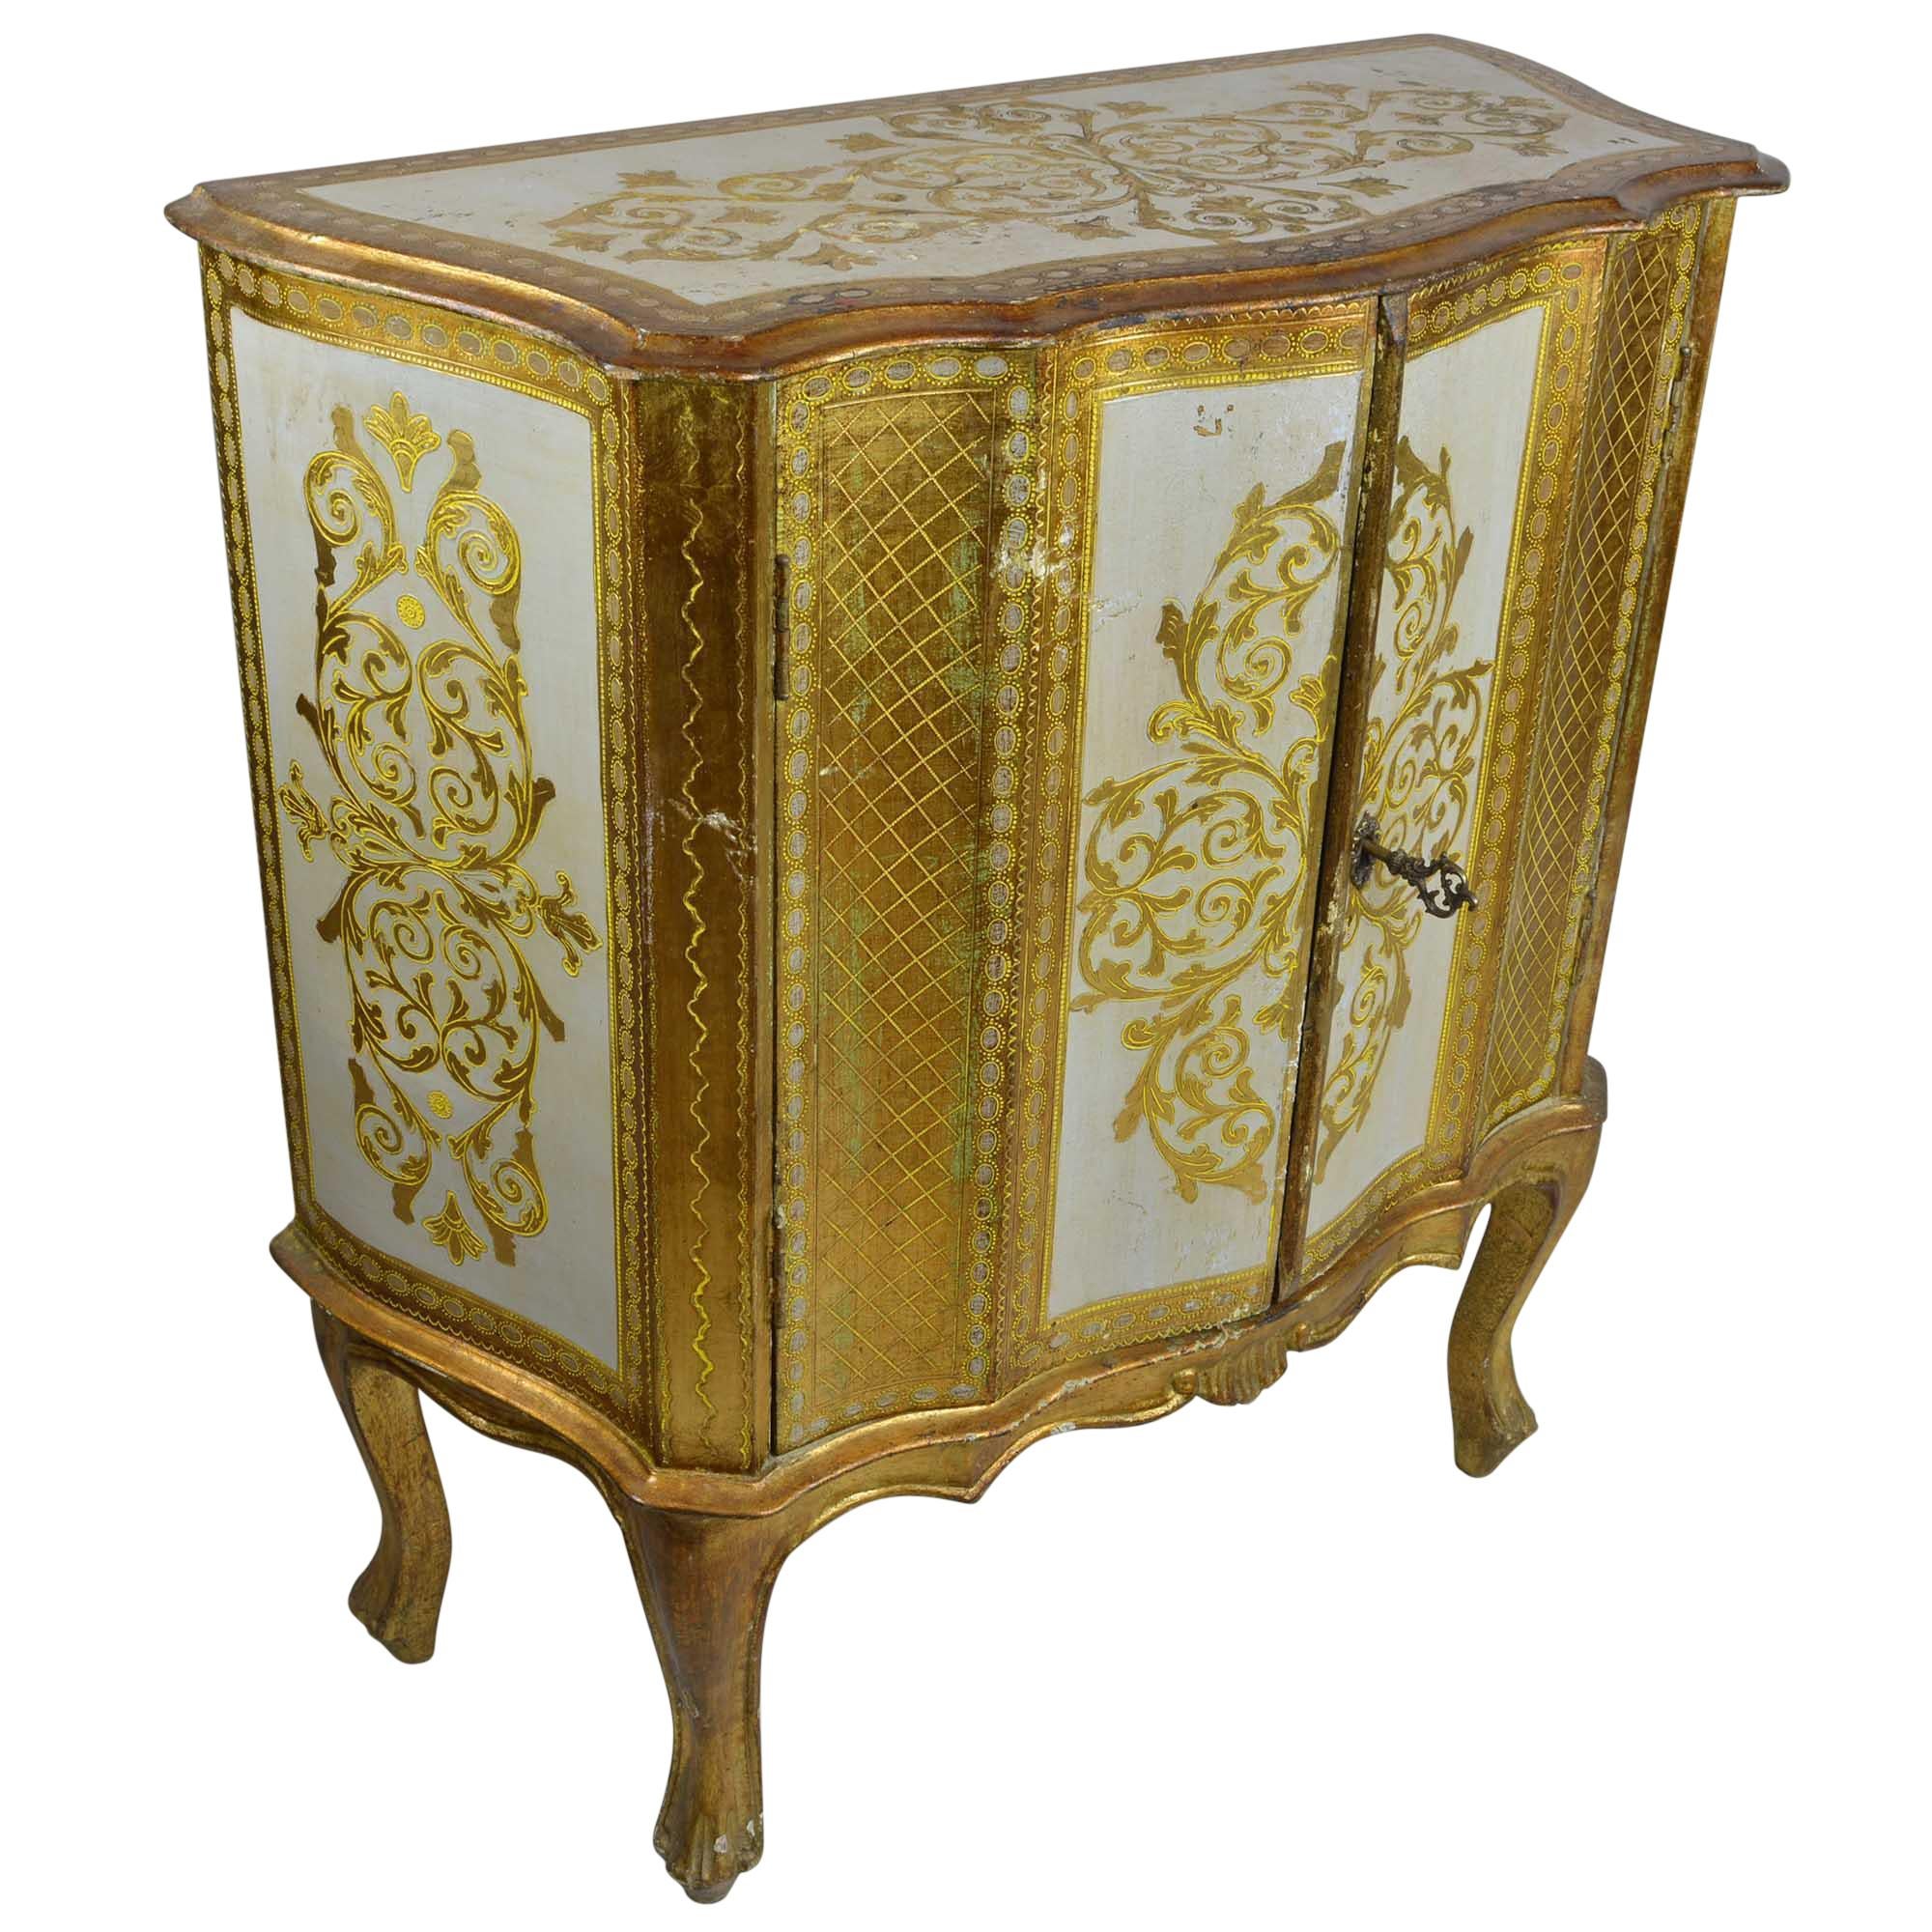 Antique cabinet that will work fabulous as a dry bar that will fit in the smallest of spaces. The detail of the gold giltwood pops off the creamy white background, The detail carries over to sides and makes a statement from any angle, even the